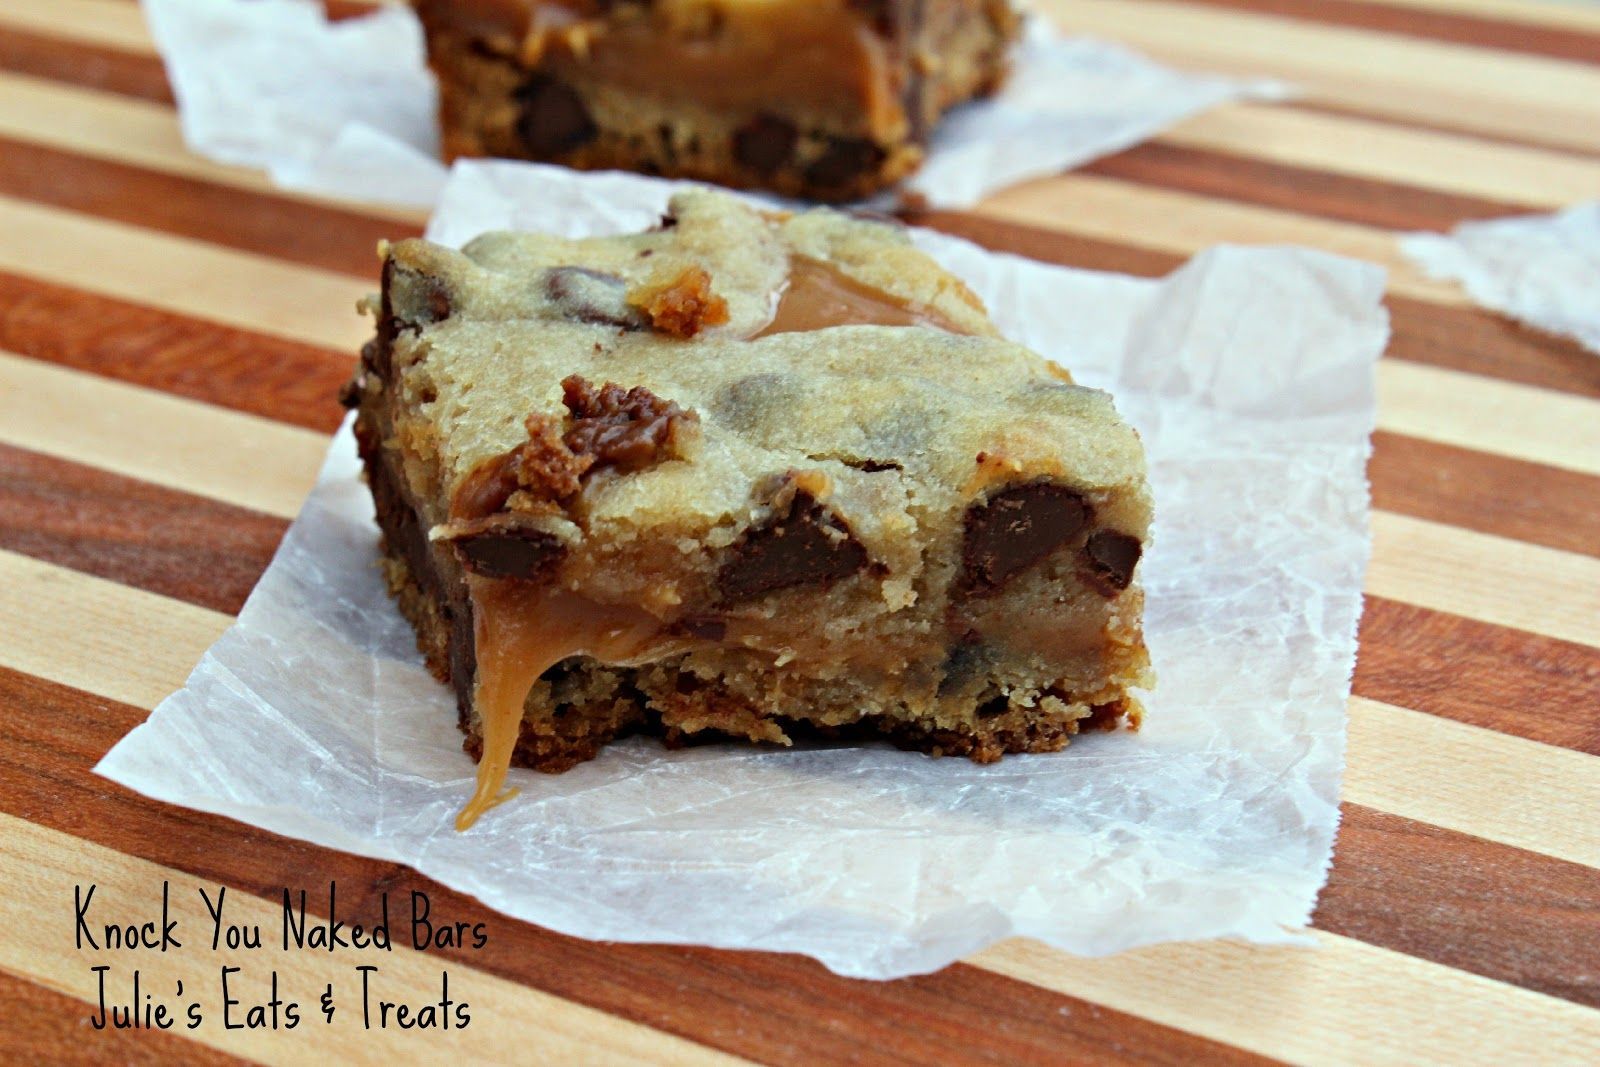 Chocolate Chip Cookie, Caramel, and Peanut Butter Bars